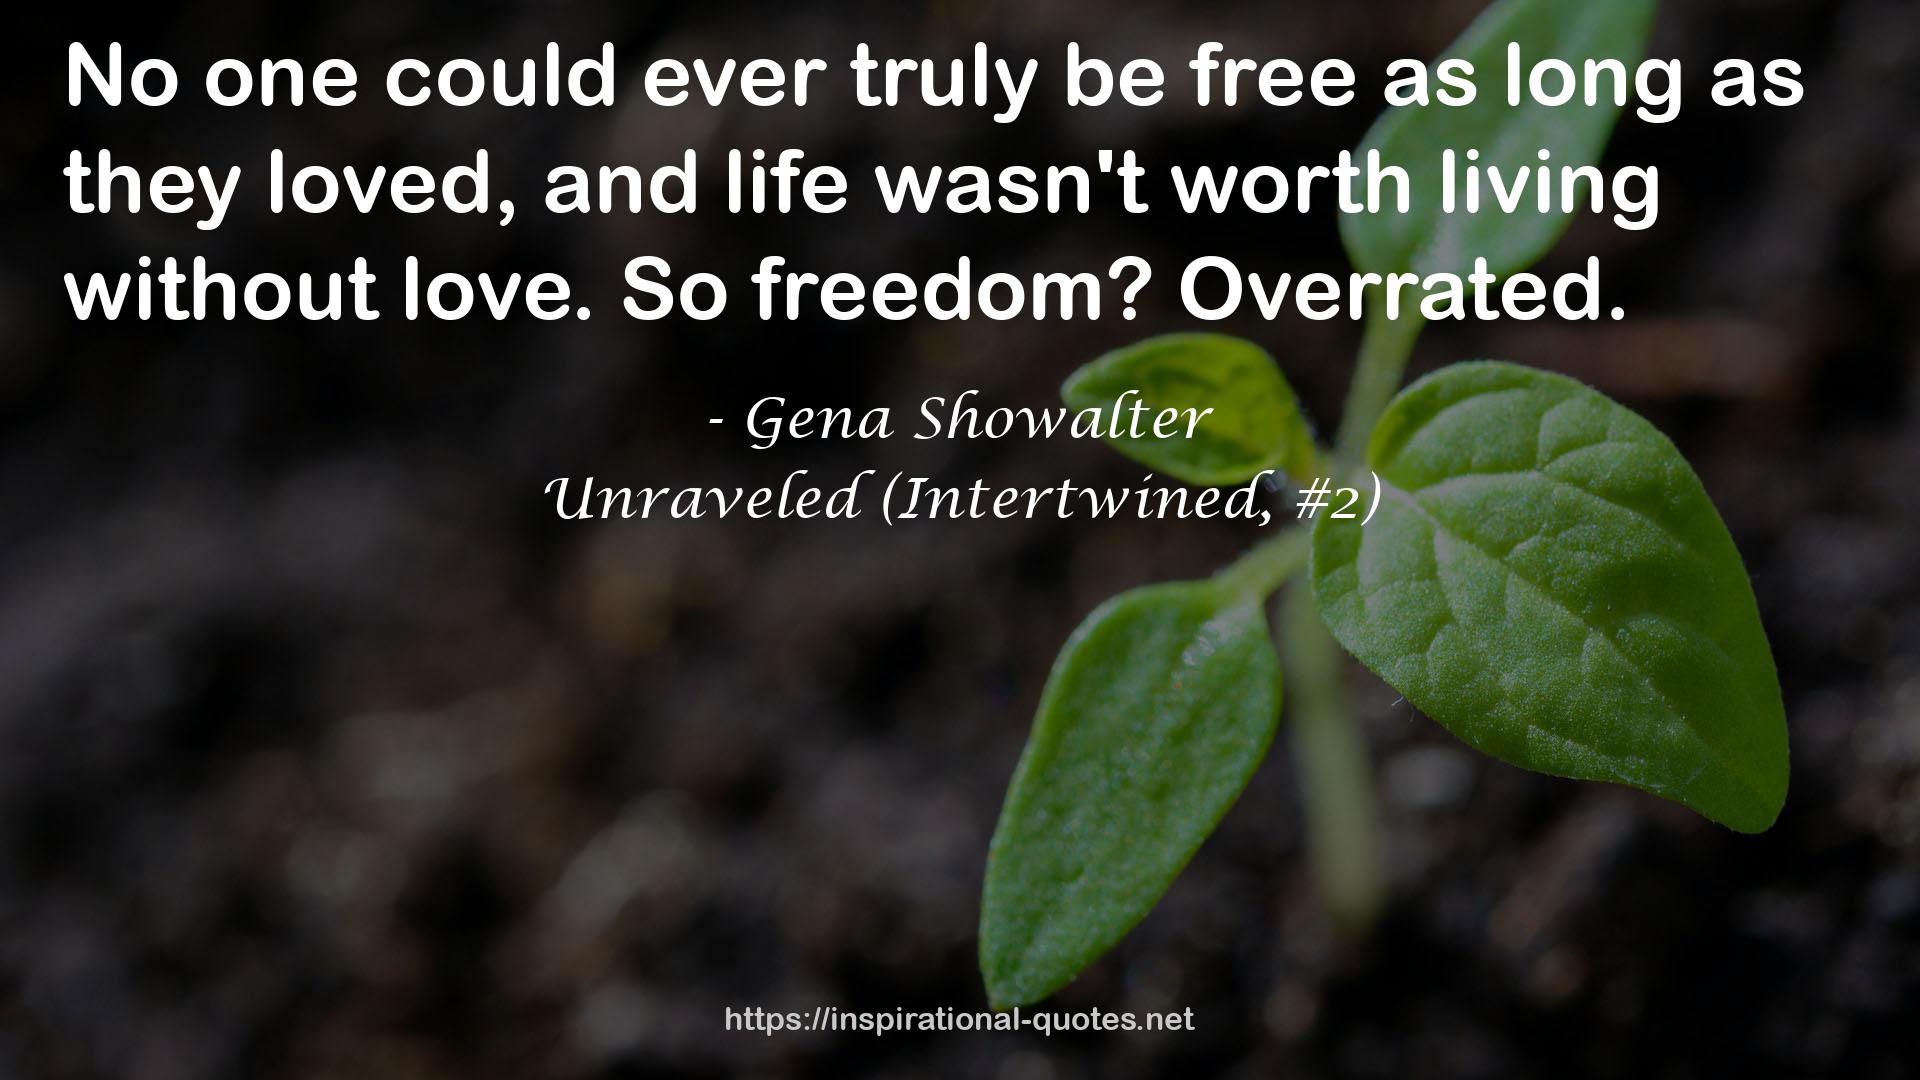 Unraveled (Intertwined, #2) QUOTES